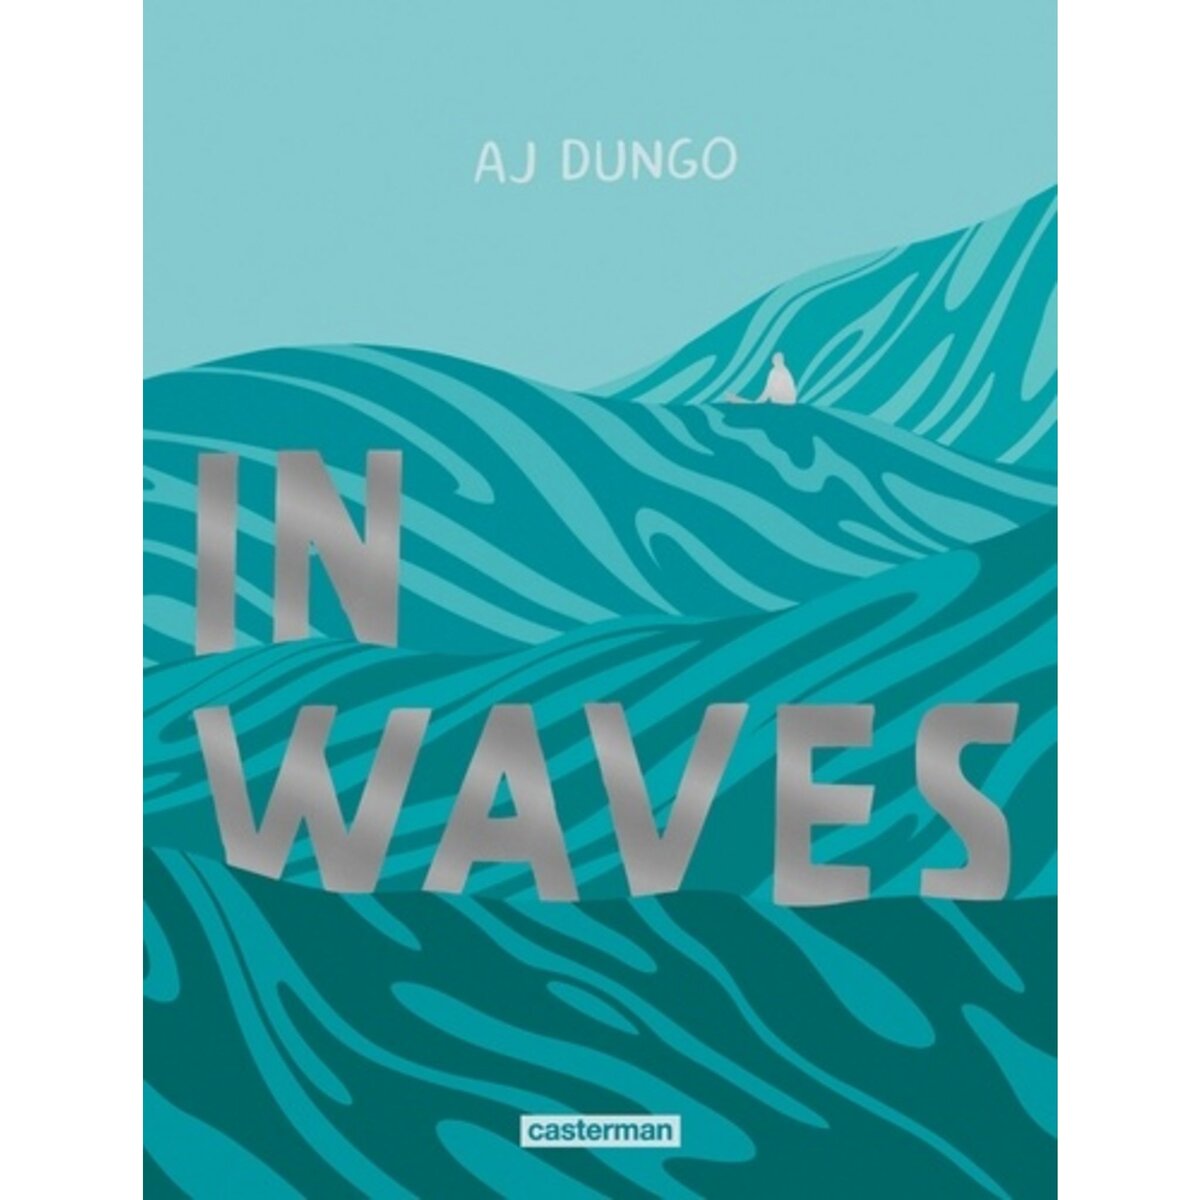  IN WAVES, Dungo AJ